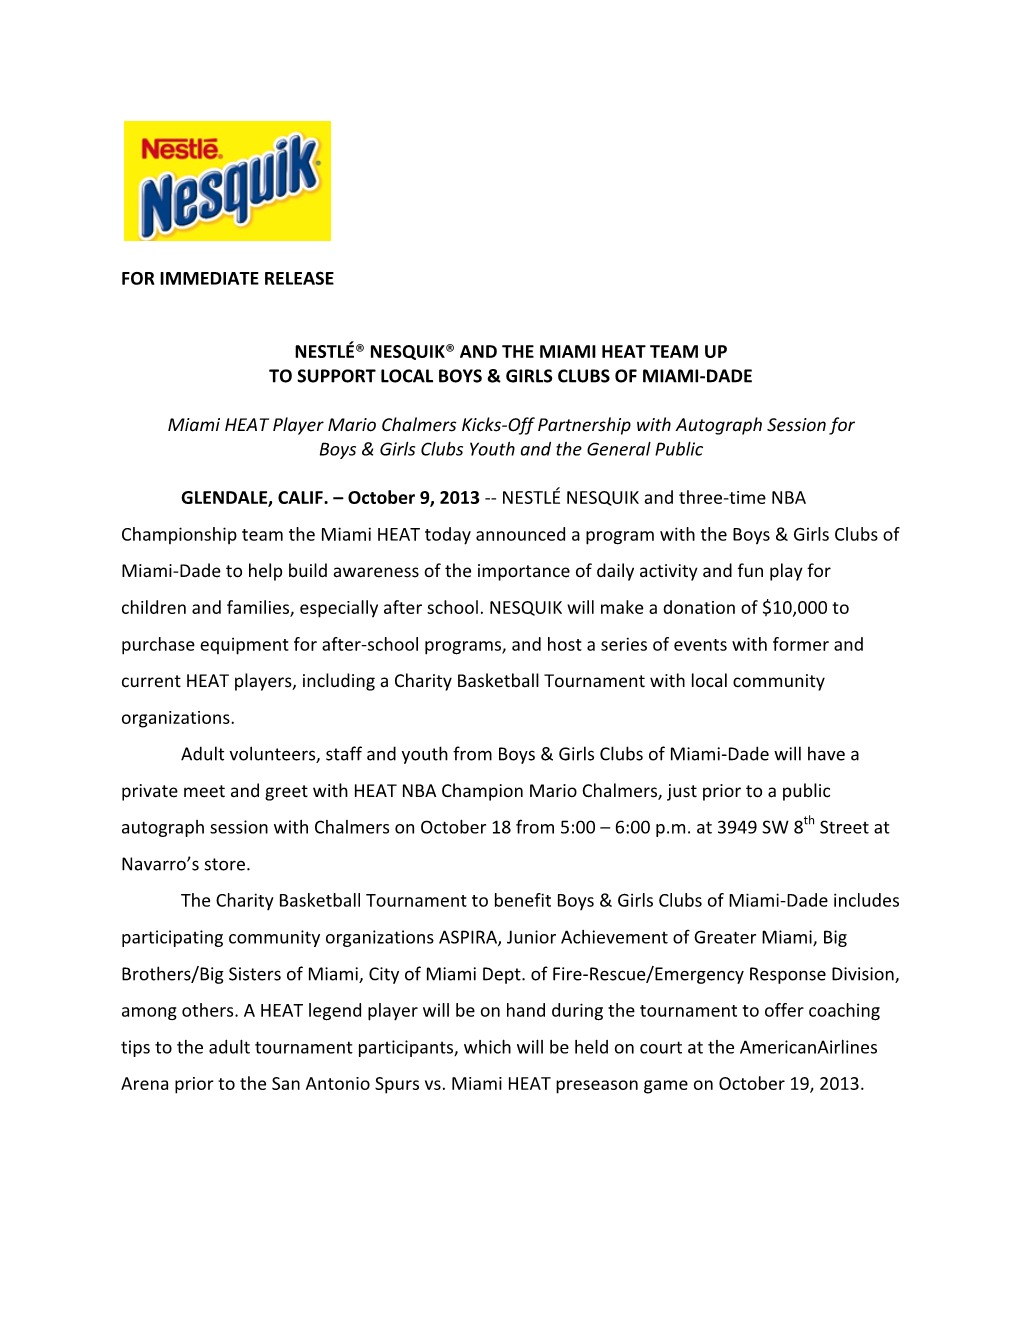 For Immediate Release Nestlé® Nesquik® and the Miami